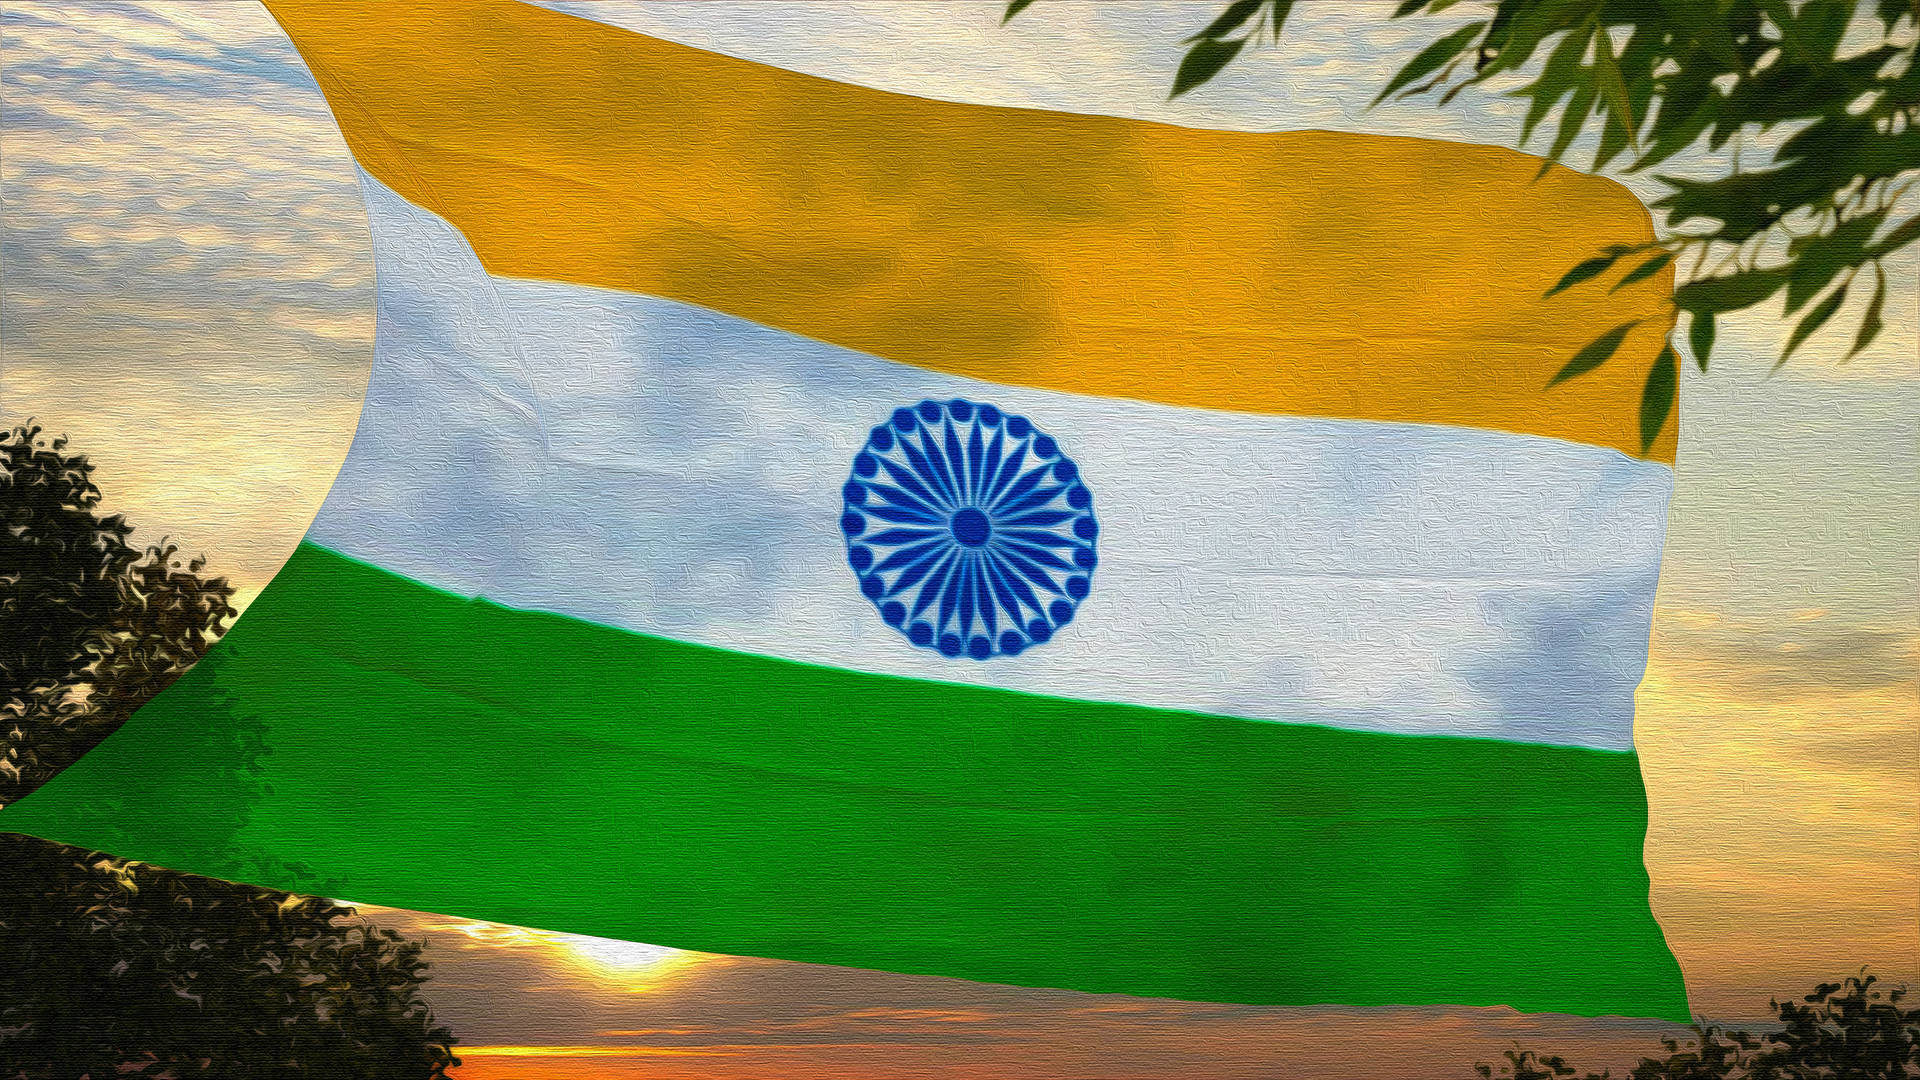 Free Indian Flag 4k Wallpaper Downloads, [100+] Indian Flag 4k Wallpapers  for FREE 